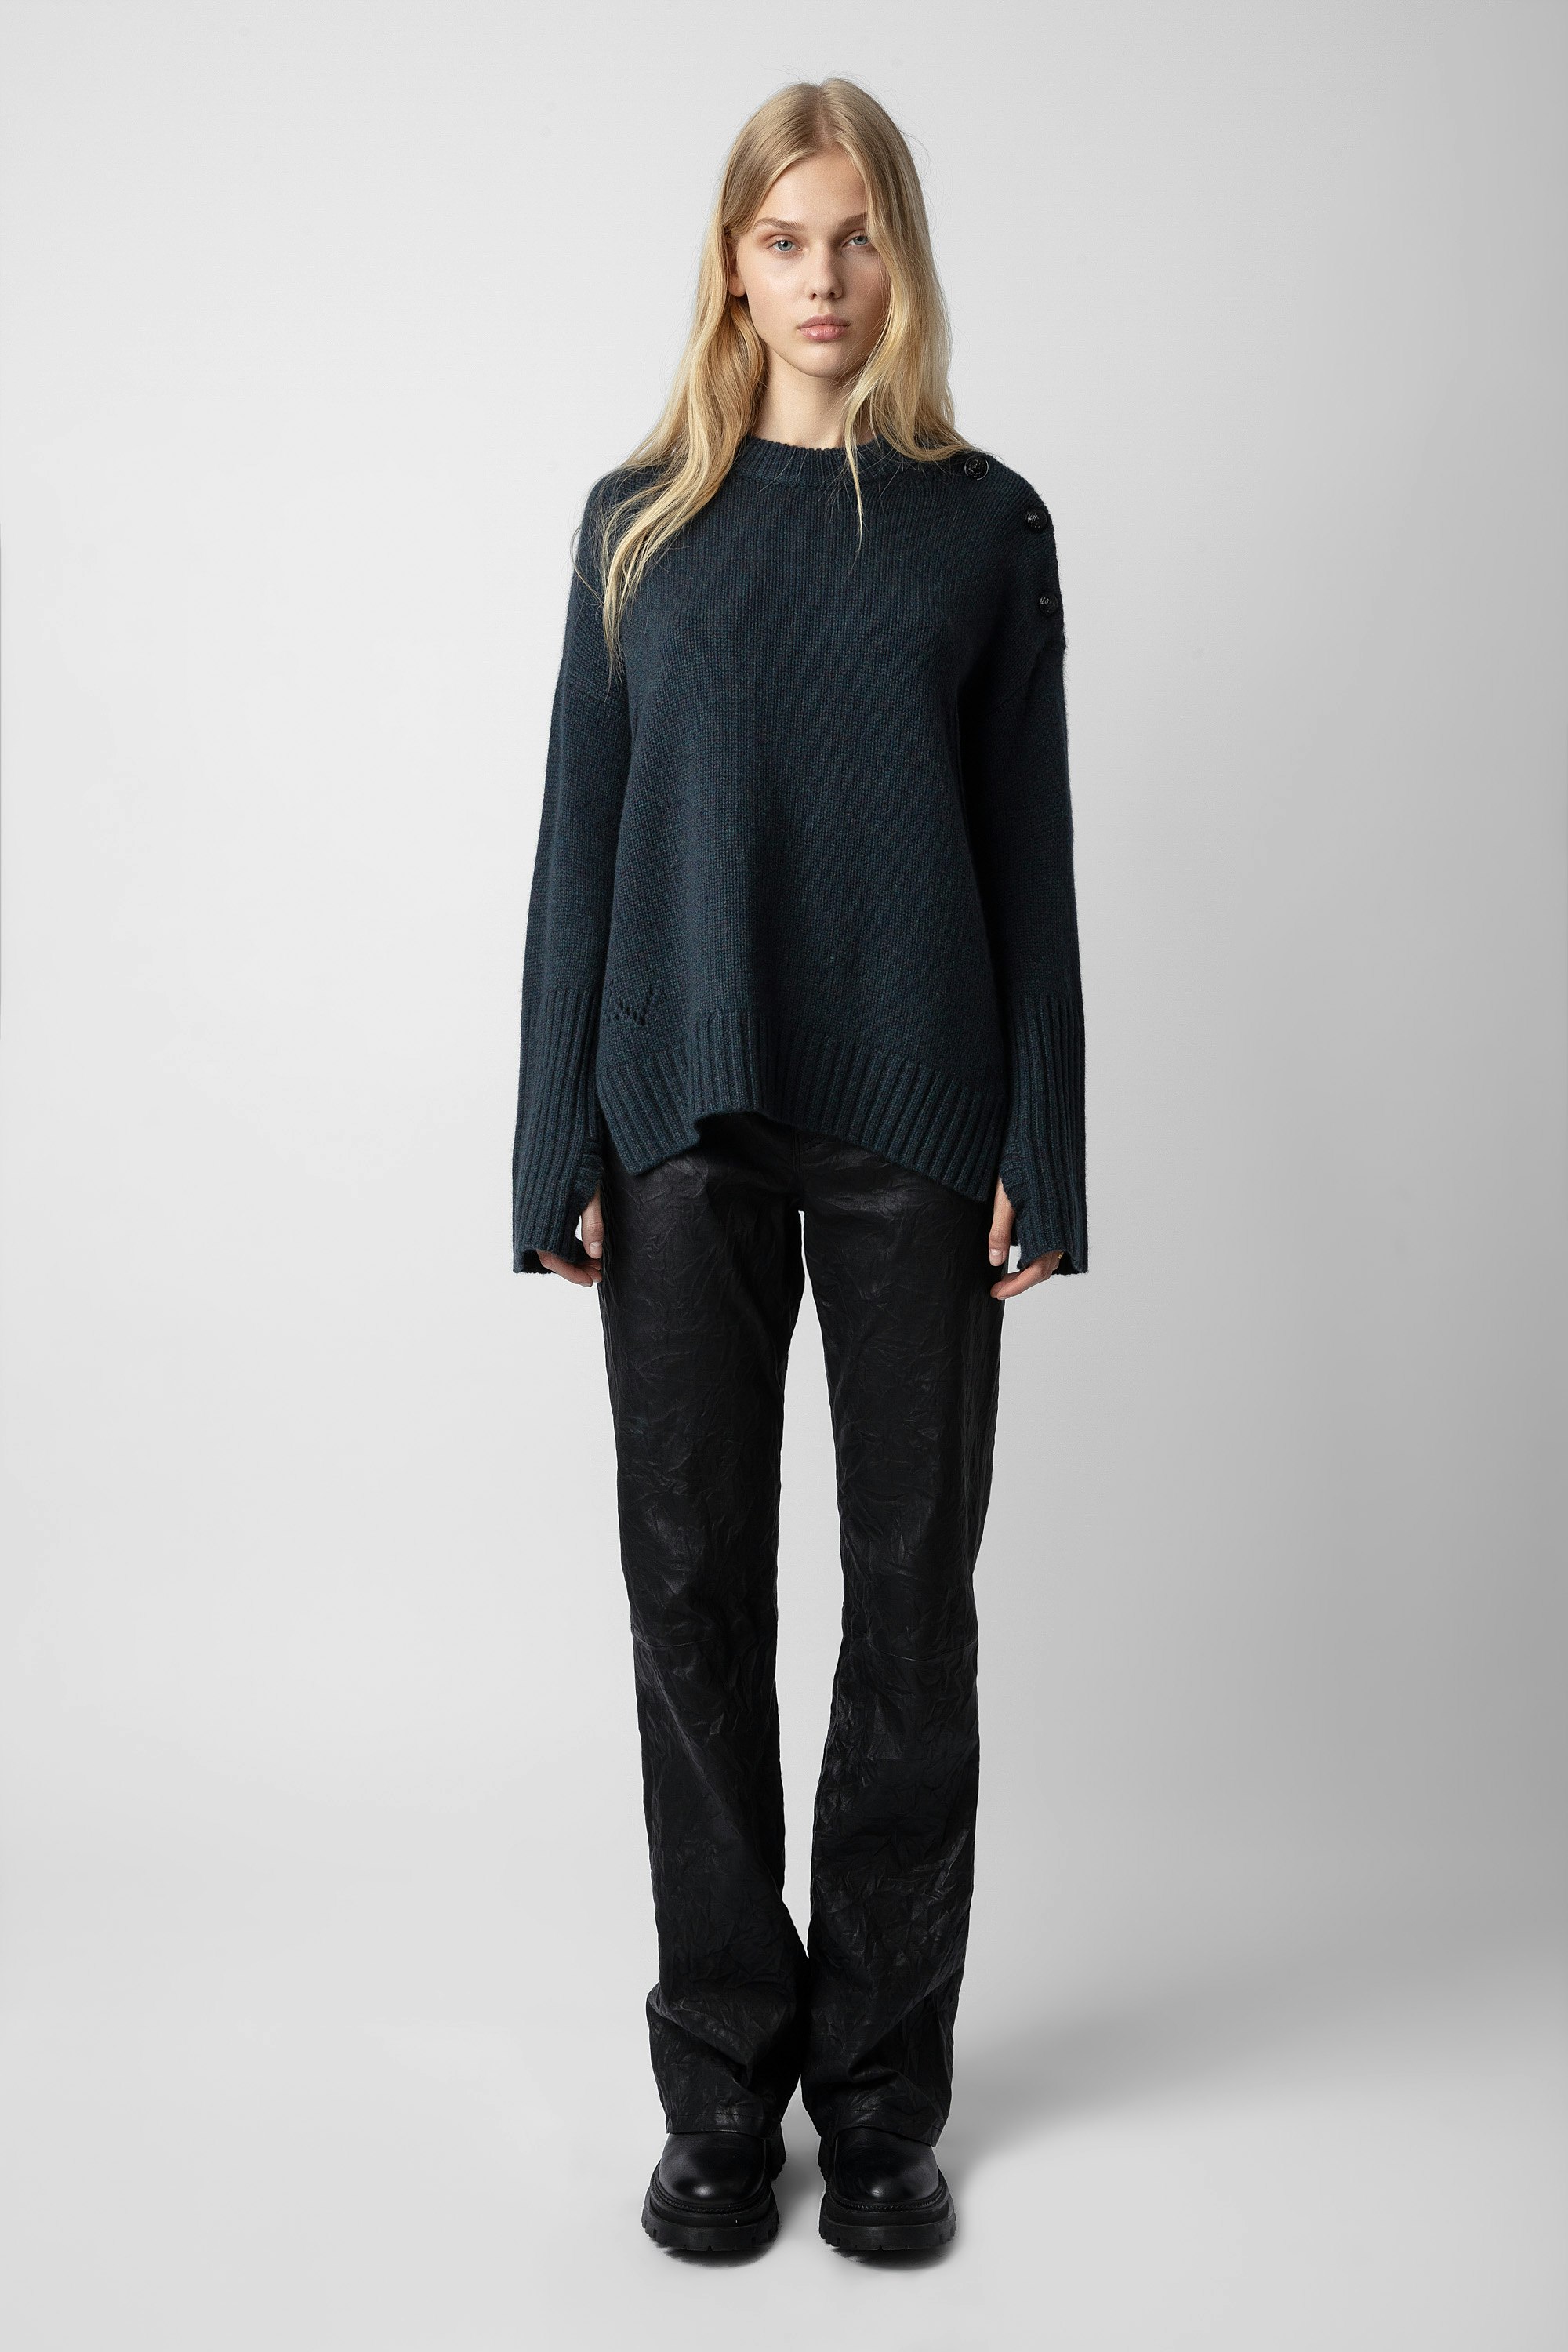 Malta Cashmere Jumper - Women’s lovat green cashmere jumper with buttons on the shoulders